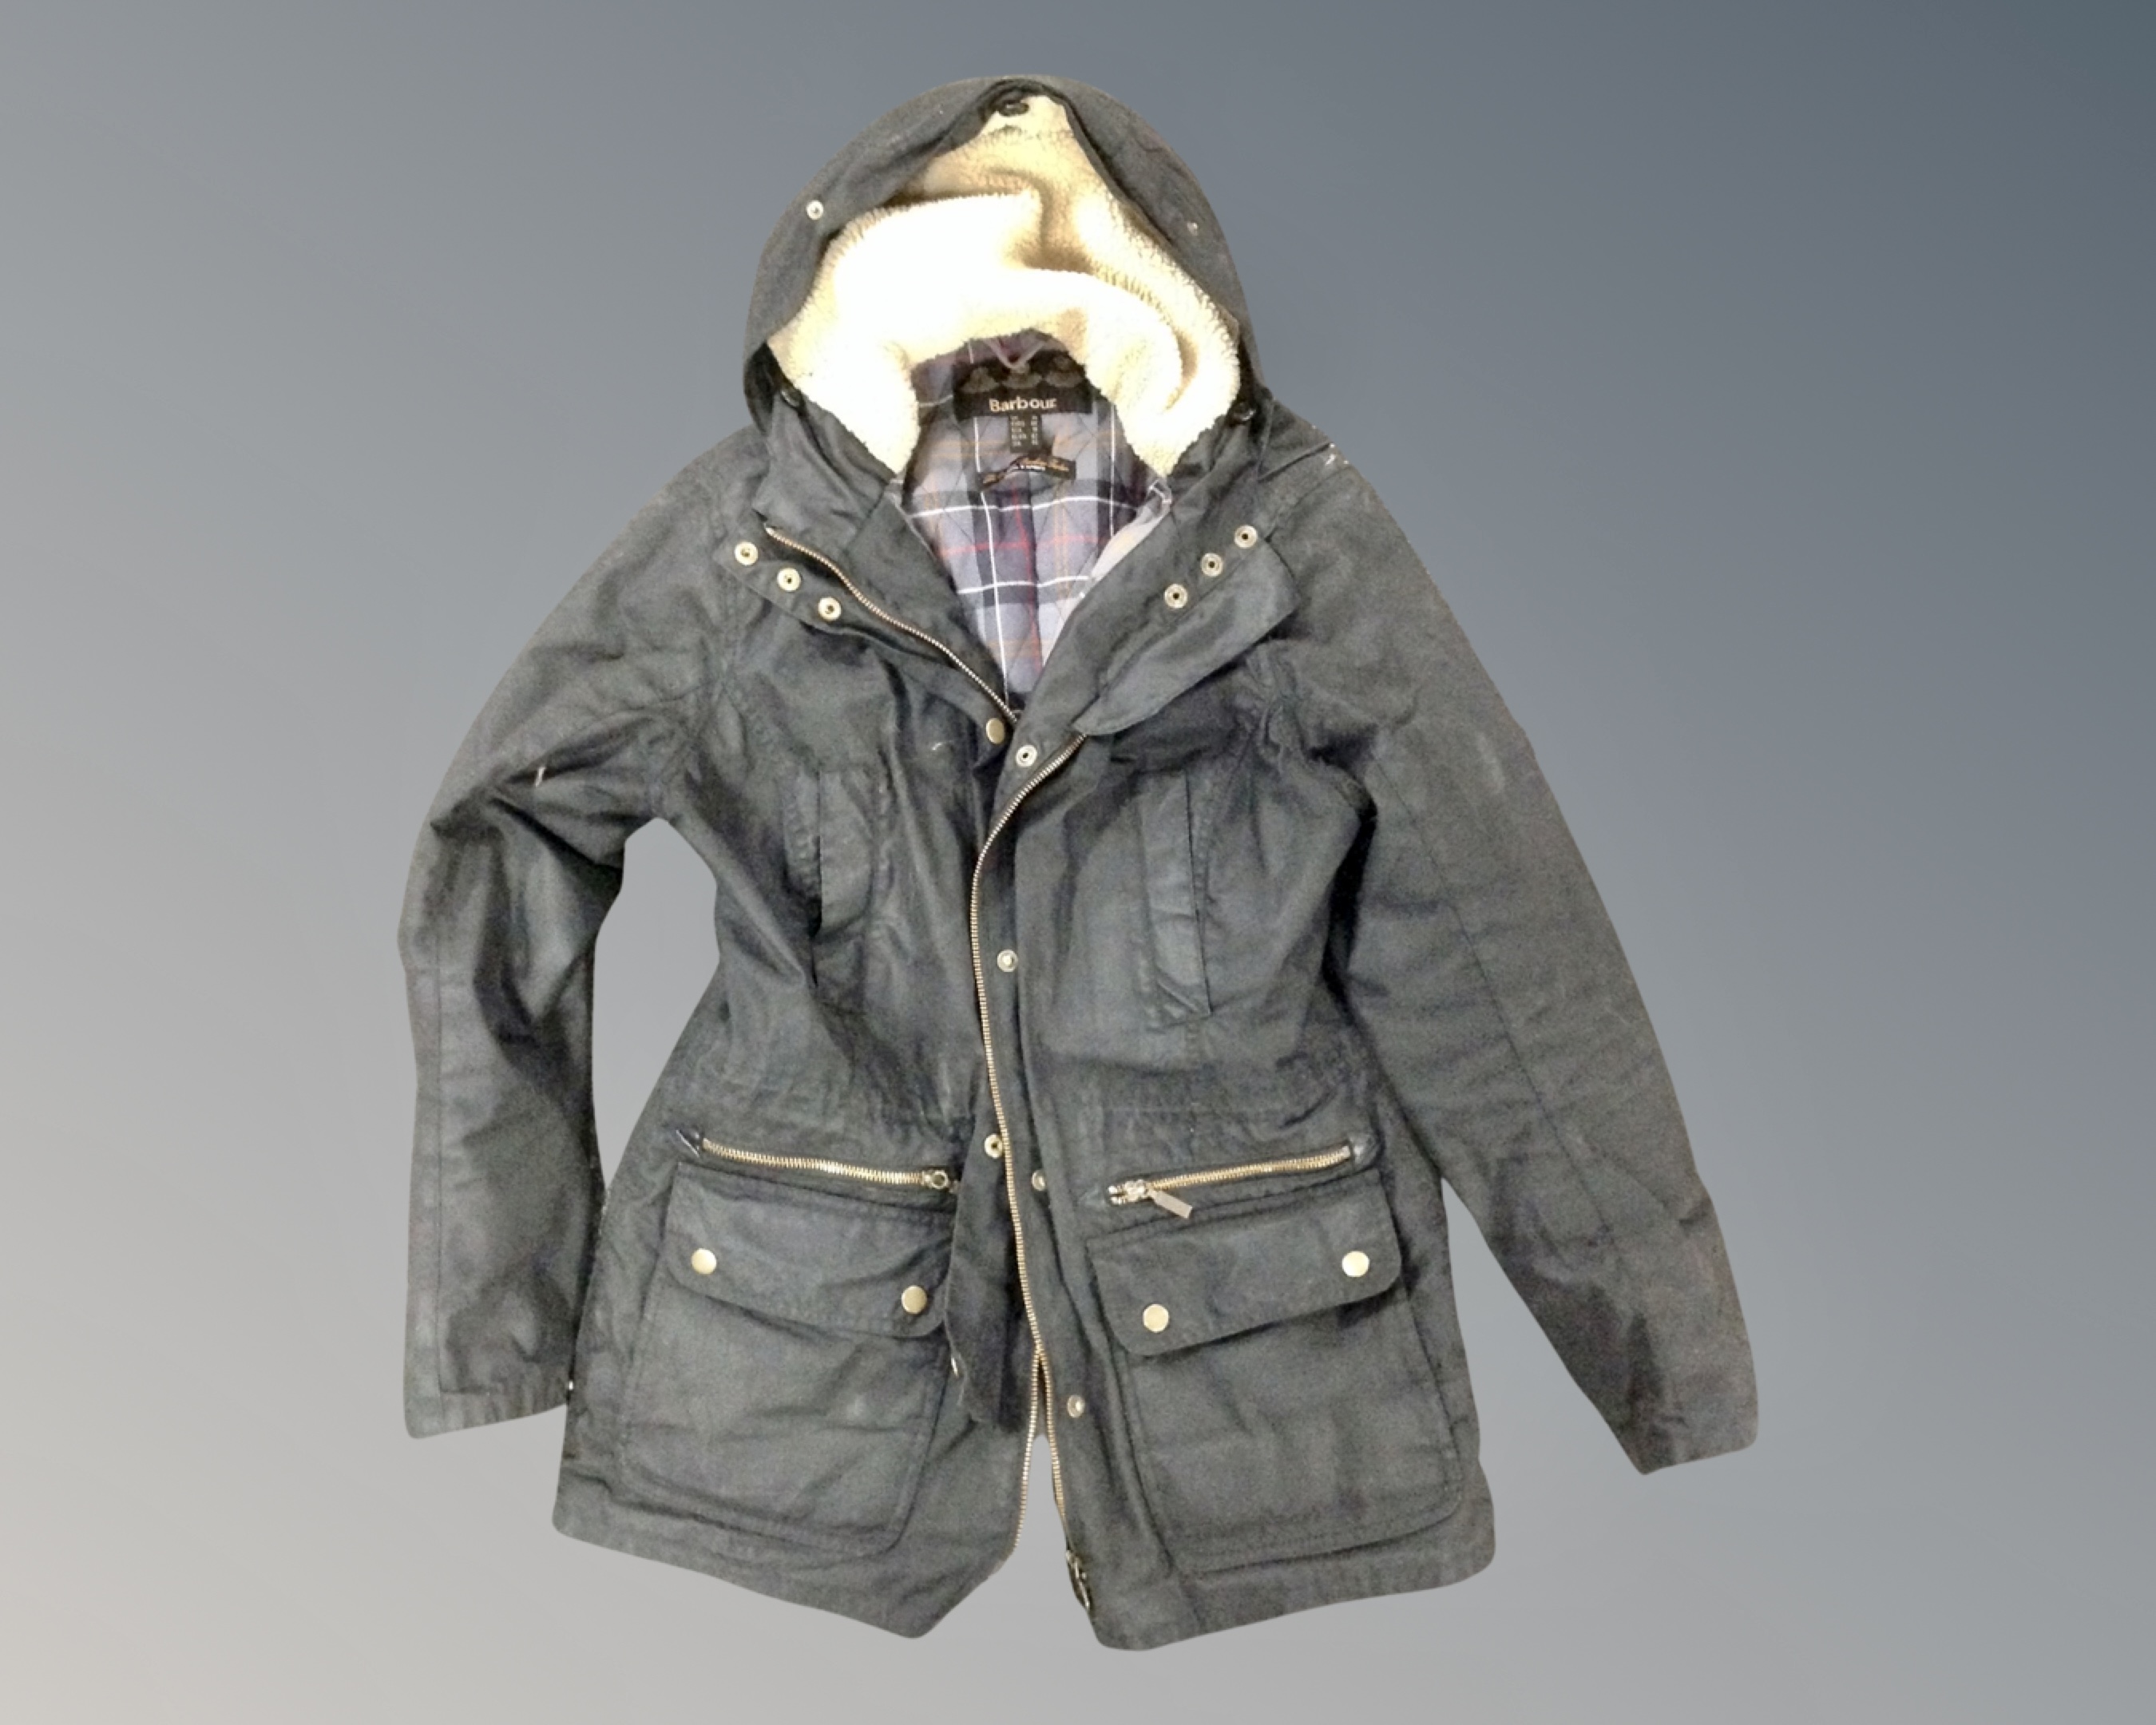 A Barbour wax jacket,